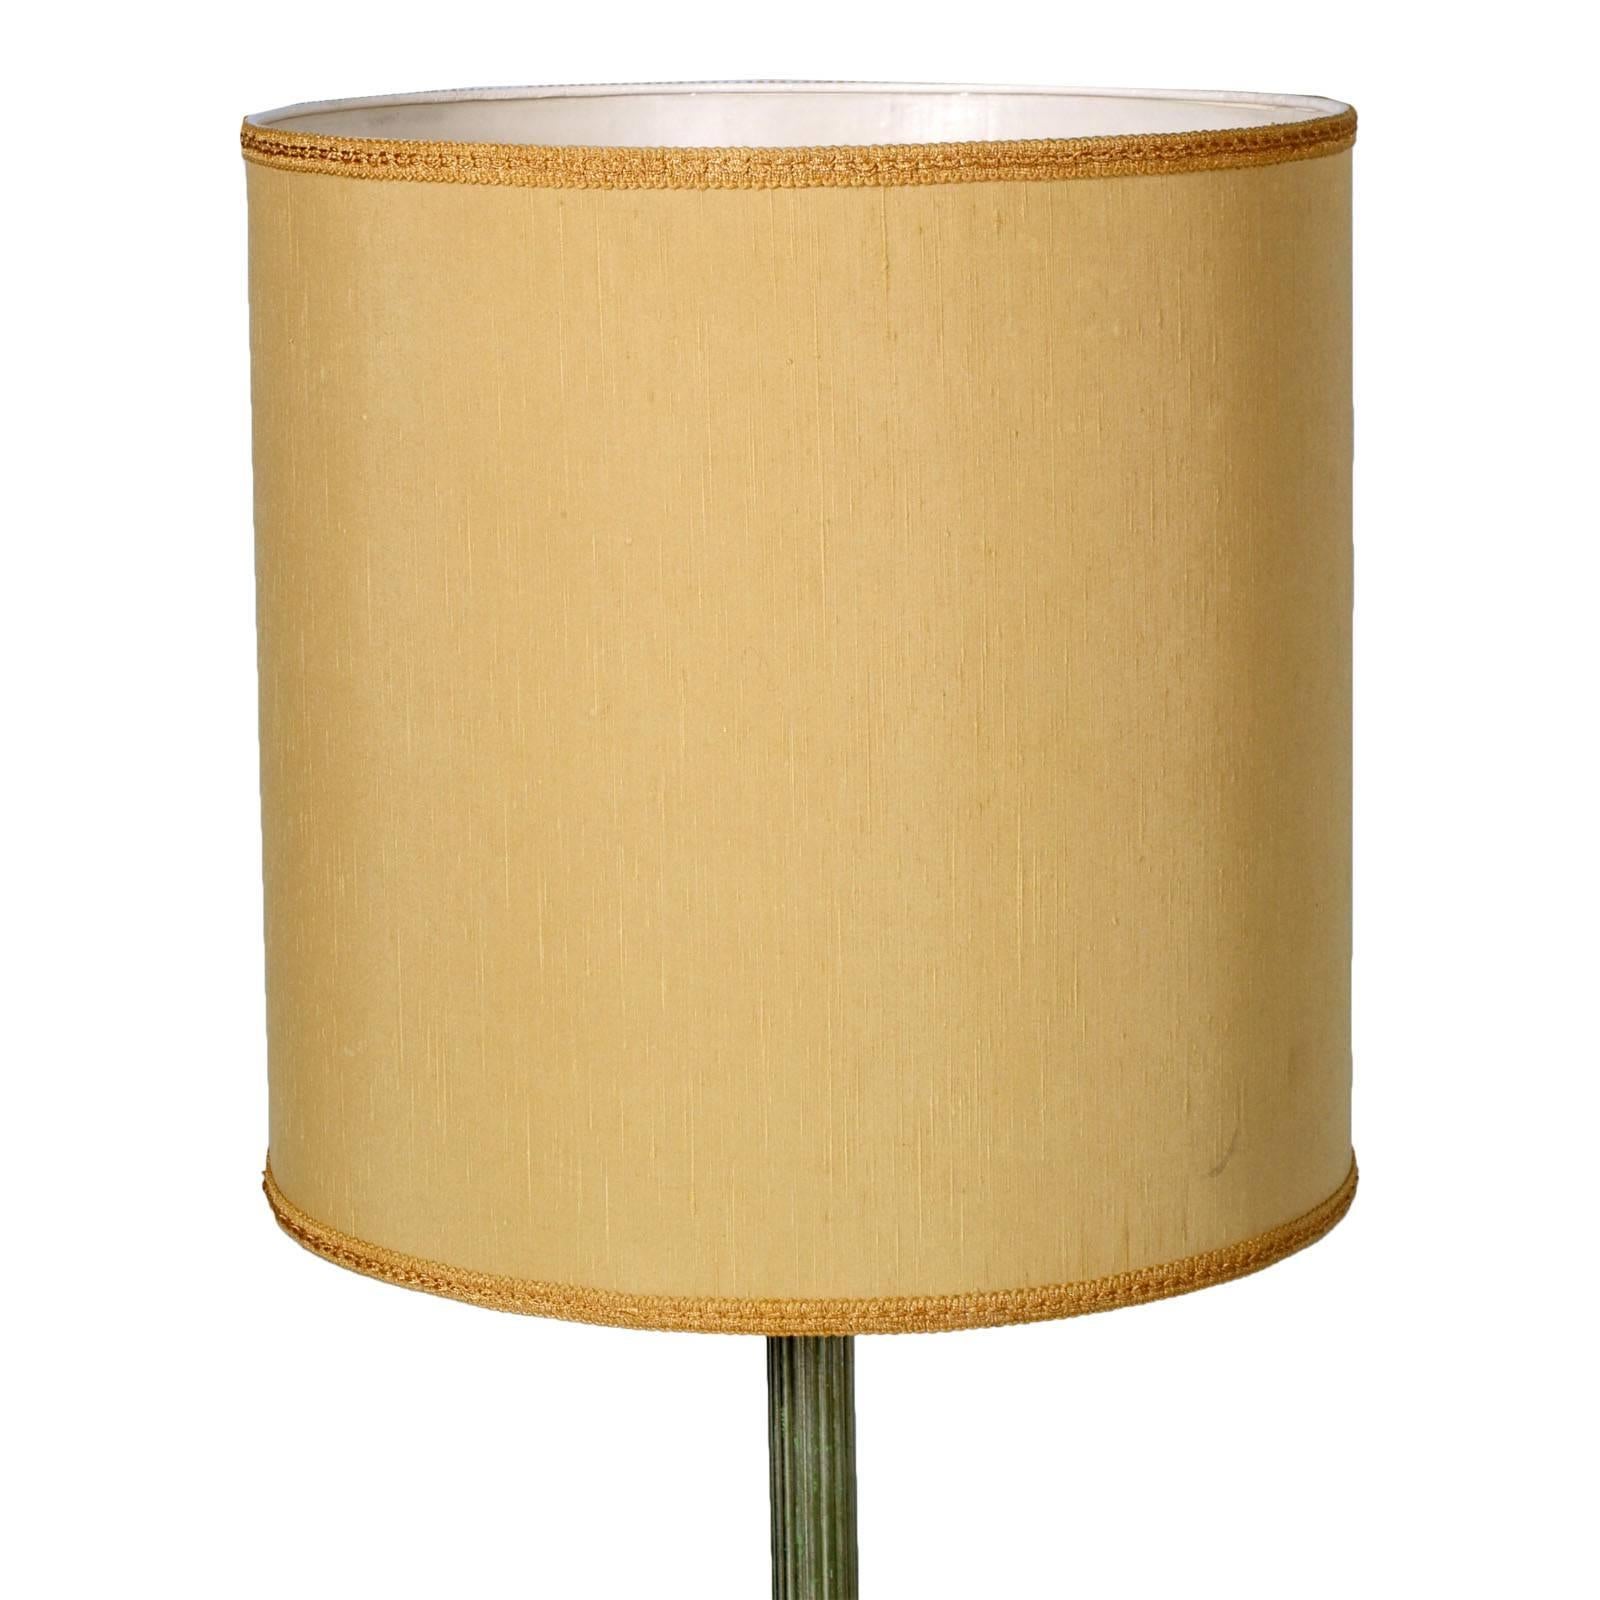 Glass Art Deco Mid-Century Modern Tripod Floor Lamp with Coffee Table Gio Ponti Style For Sale